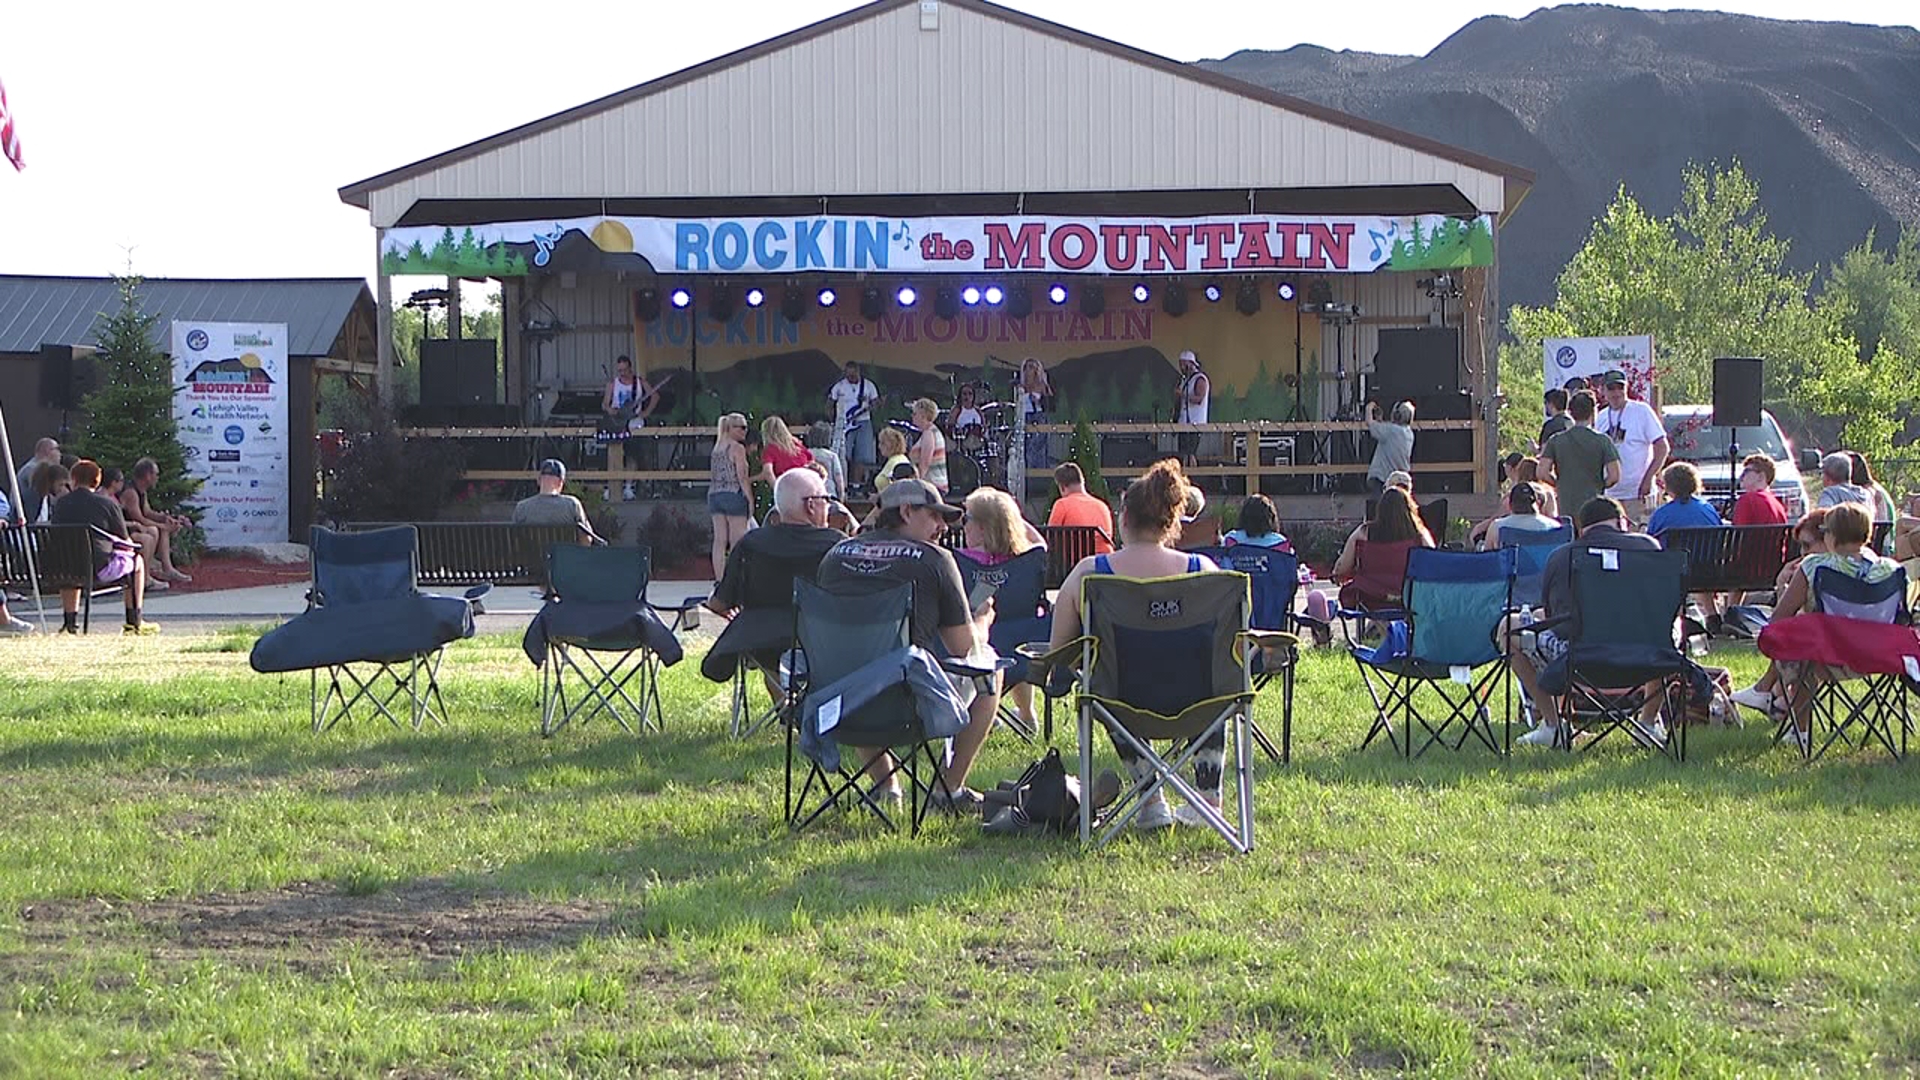 Scorching temperatures and music filled the air at City View Park in Hazleton Friday night for the first-ever Rockin' the Mountain.